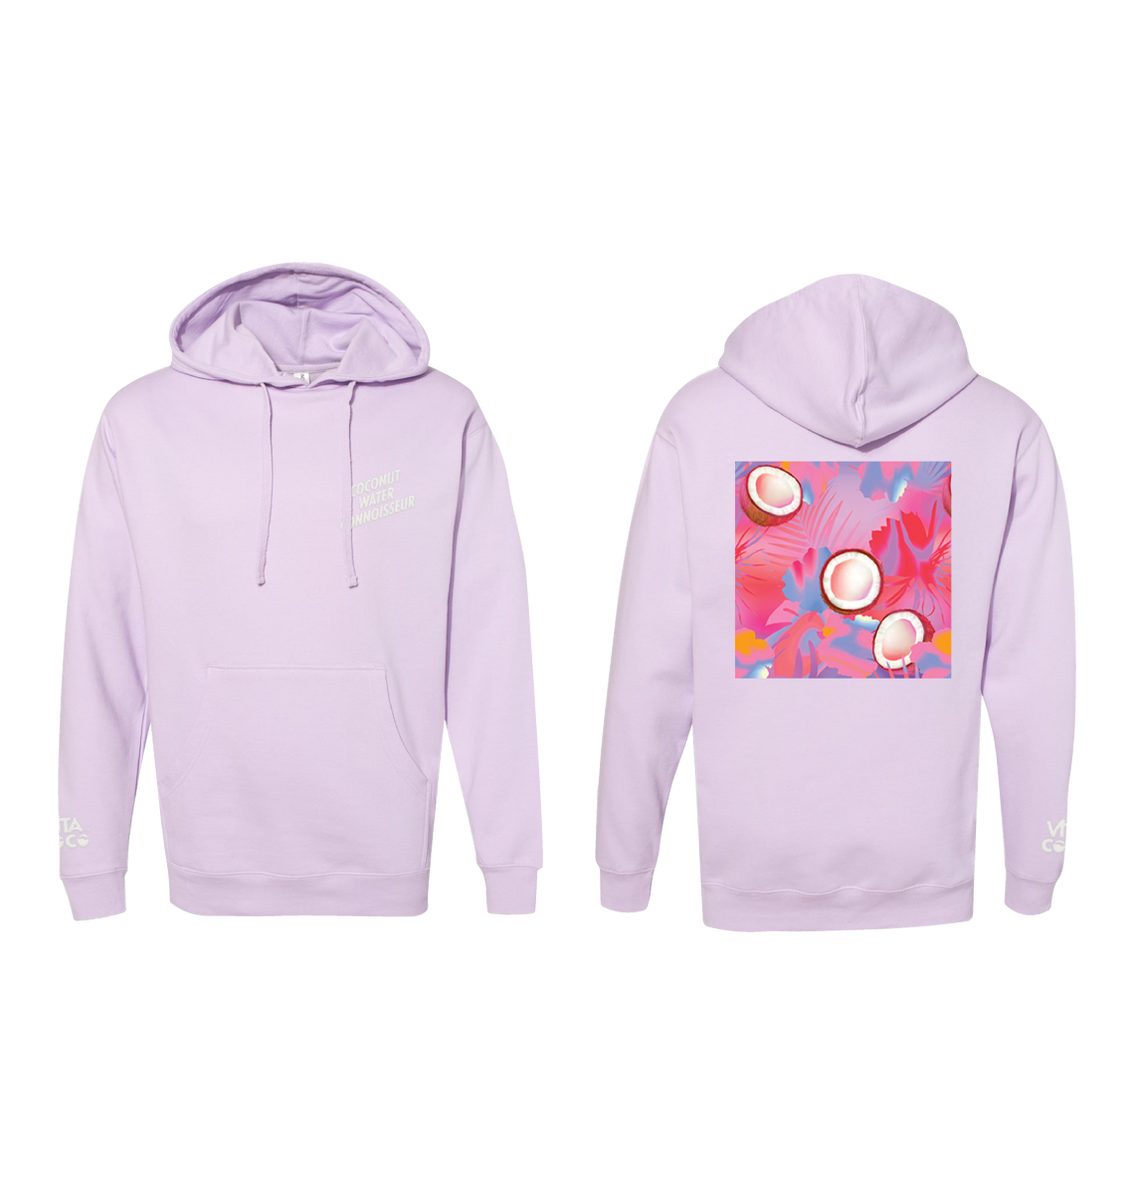 A limited-edition Vita Coco purple hoodie with a pink flower on it, inspired by Bretman Rock, the coconut water connoisseur.